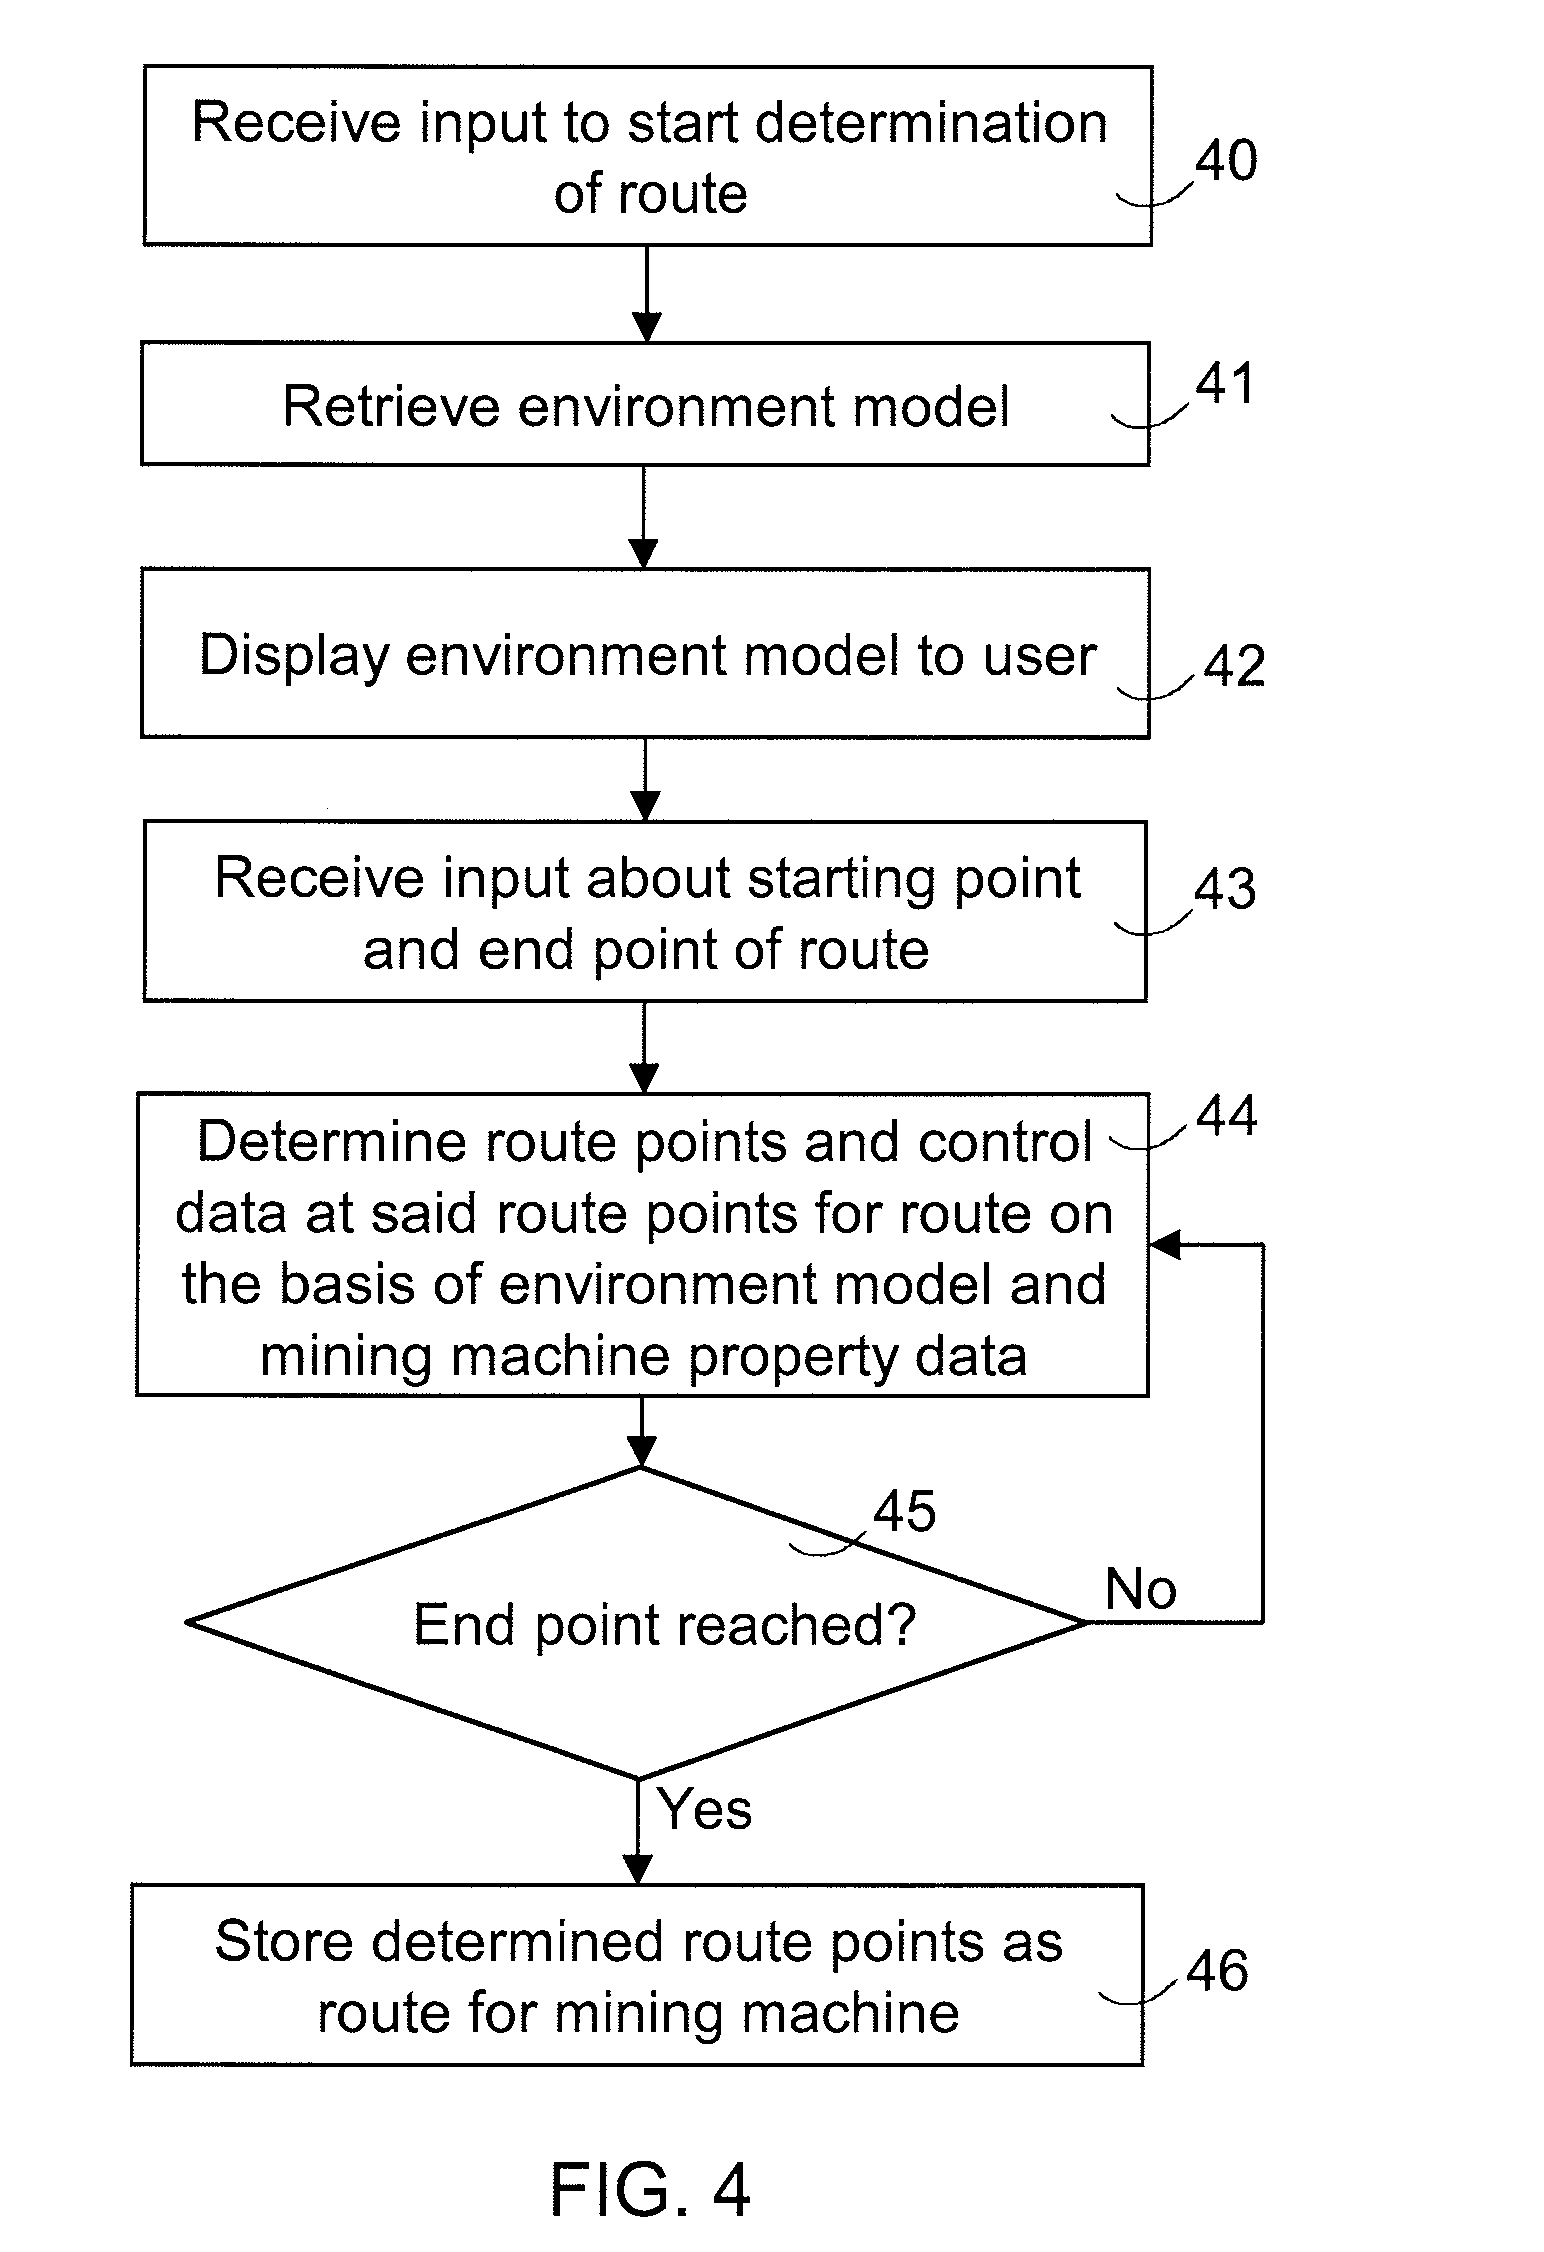 Determination of Route for Arranging Automatic Control of Mobile Mining Machine